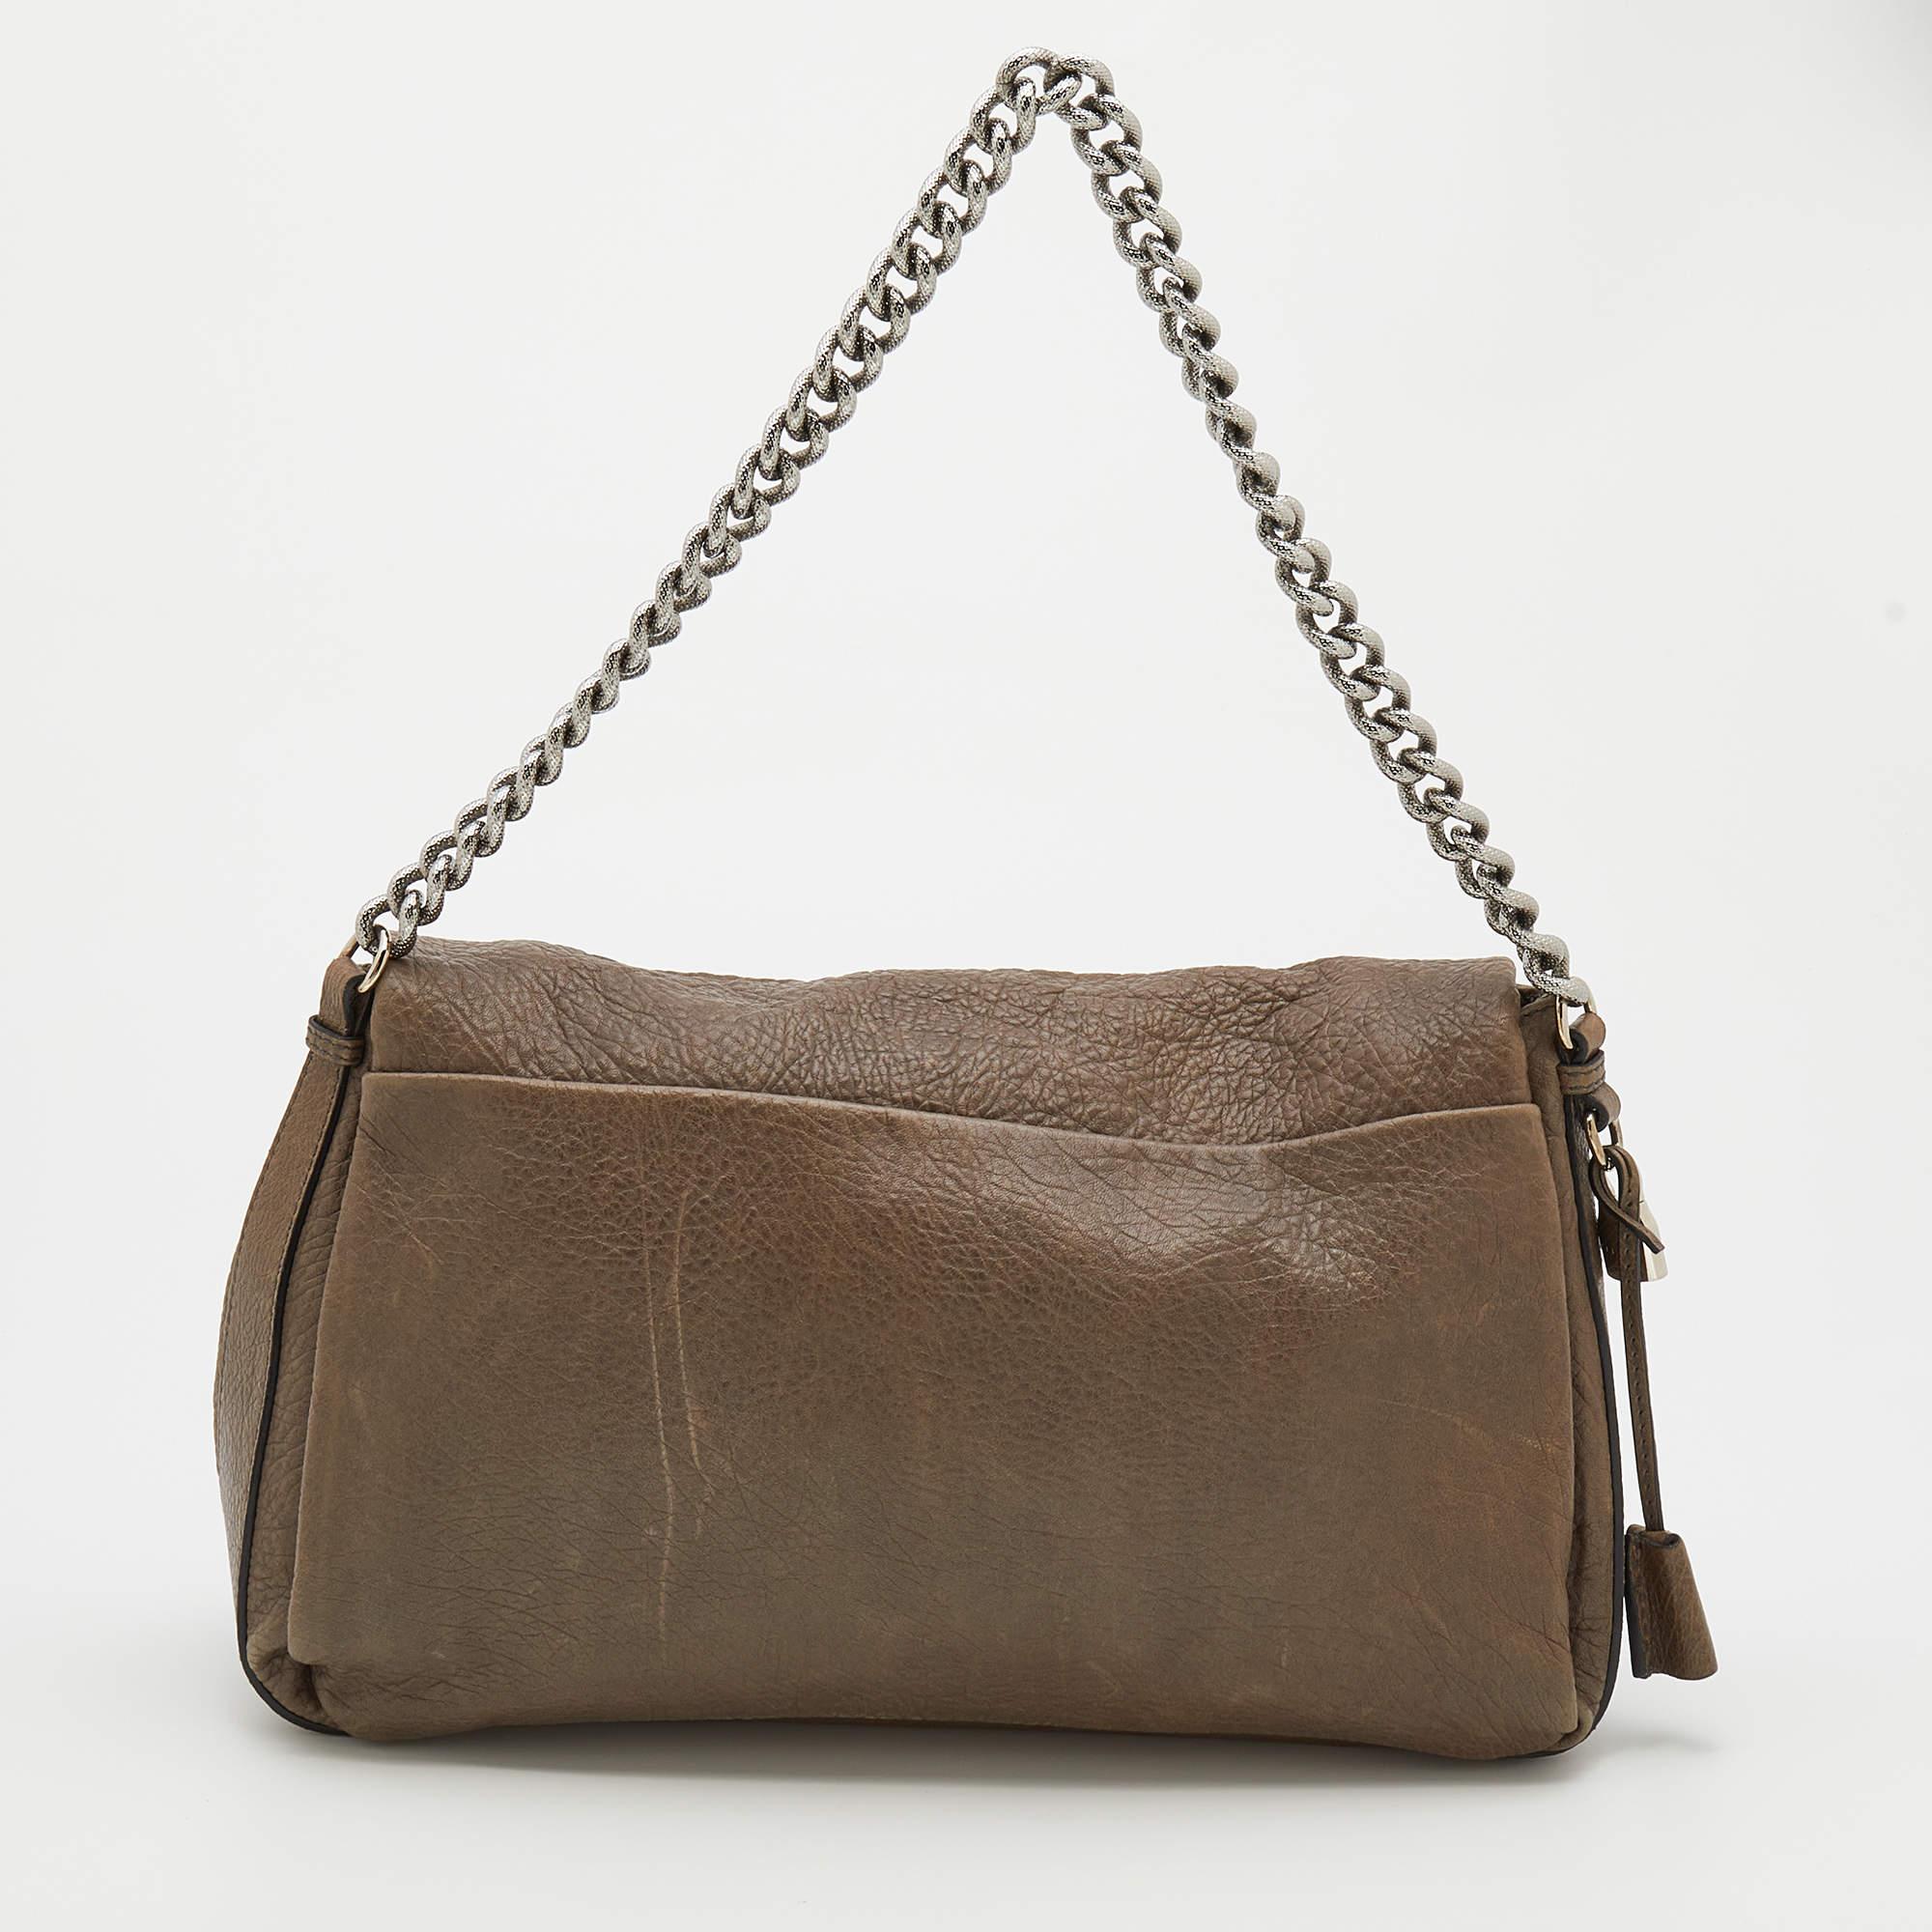 This elegant shoulder bag is perfect for your next outing to town. It is made of high-quality leather and can match a day or evening outfit. It has a comfortable handle and a lined interior for all your essentials.

Includes: Padlock & Key